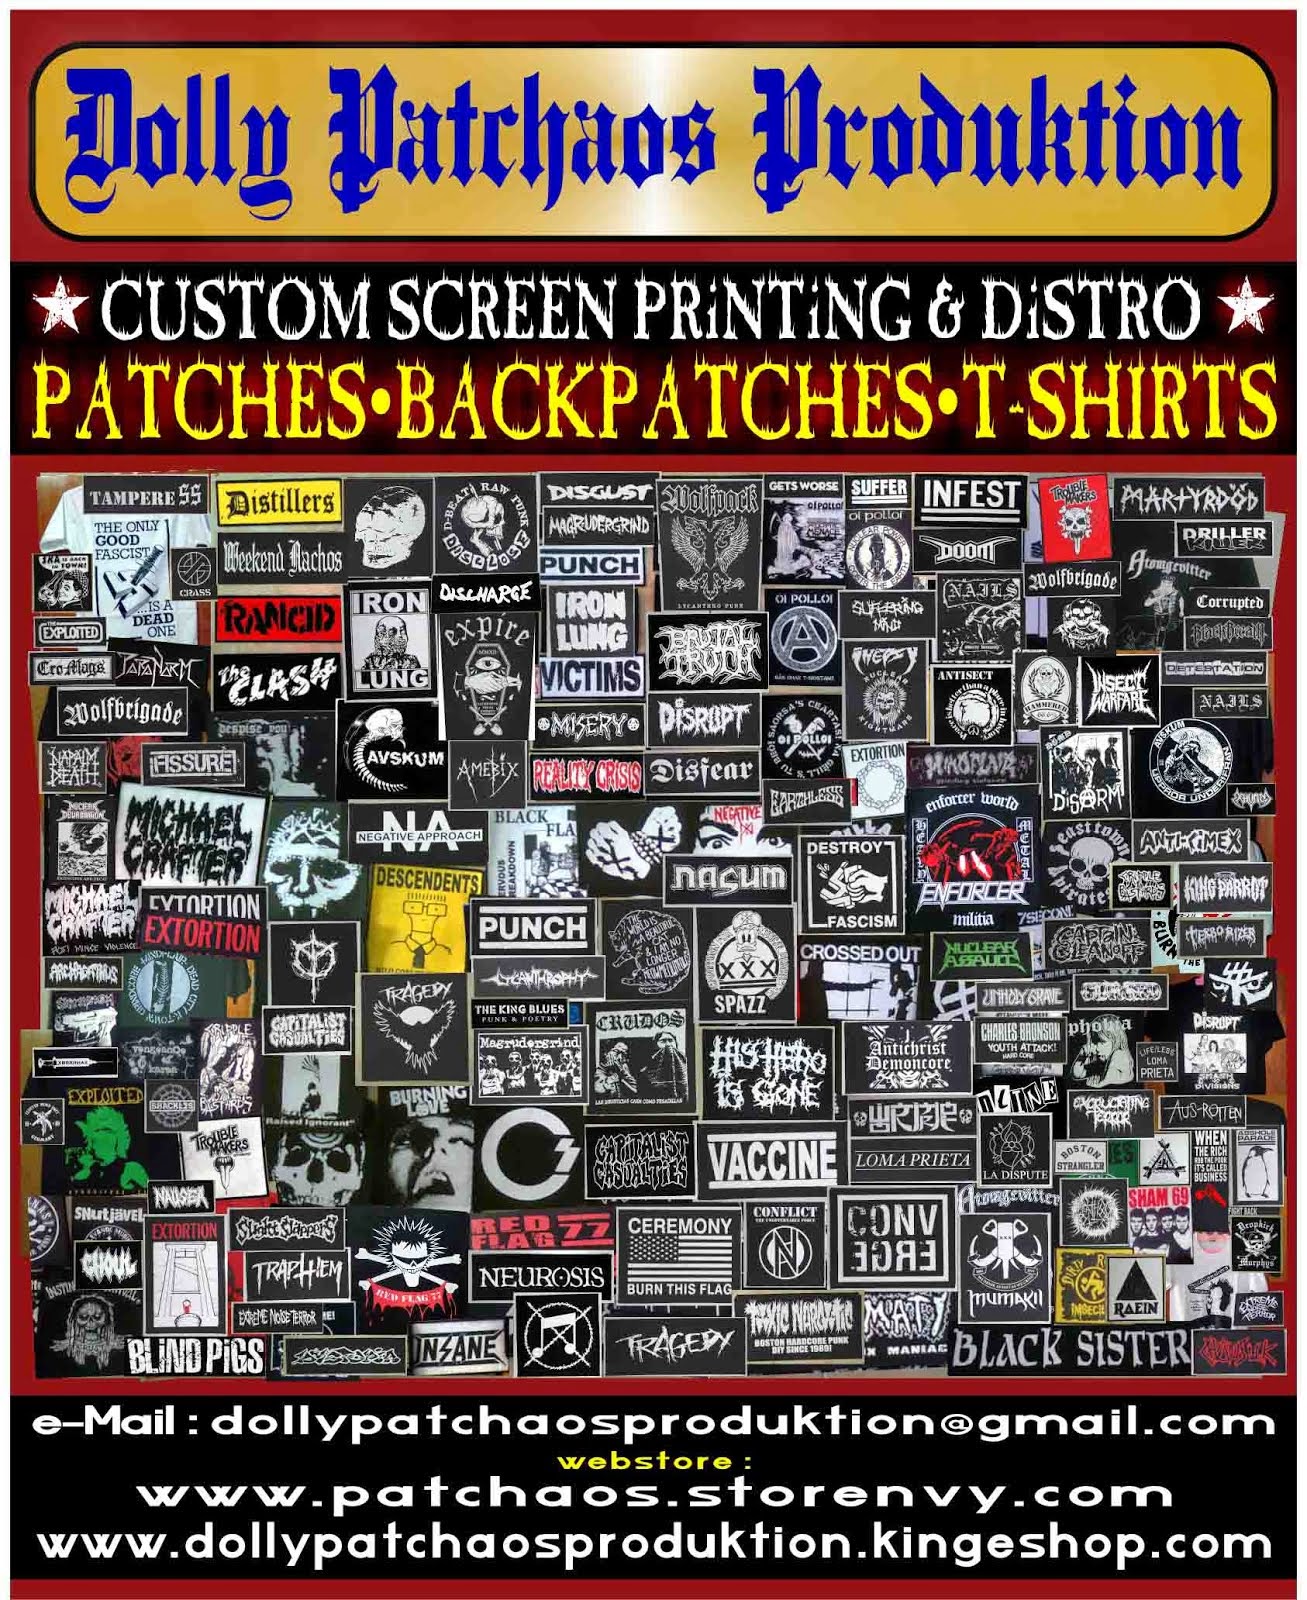 Dolly Patchaos Produktion (DIY MERCH-MAKER & DISTRO) since 2000